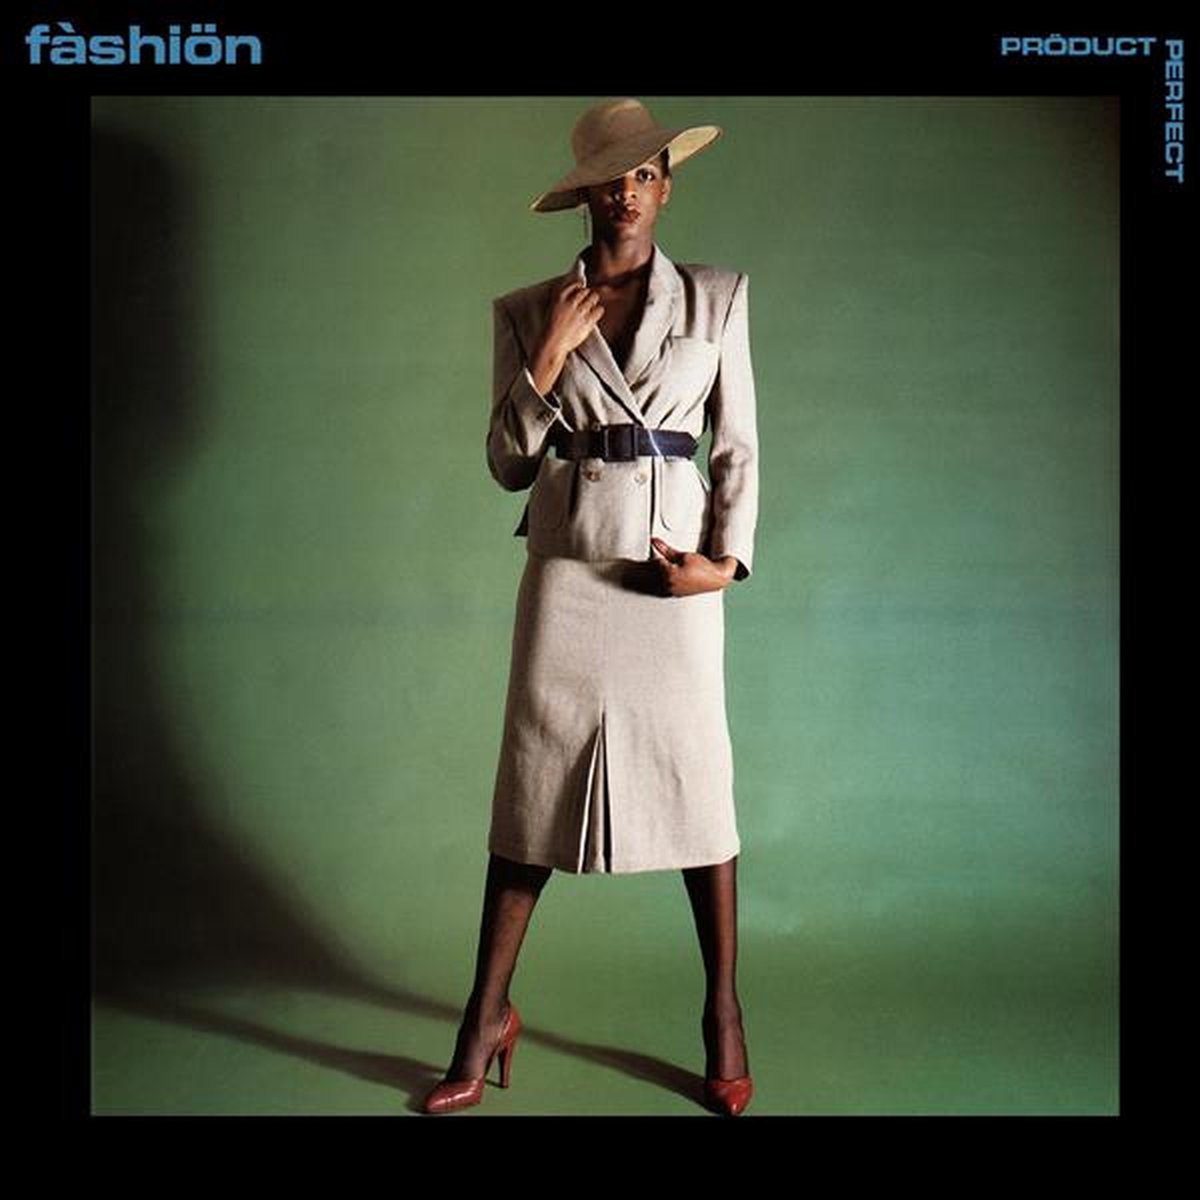 Fashion - Product Perfect (LP)